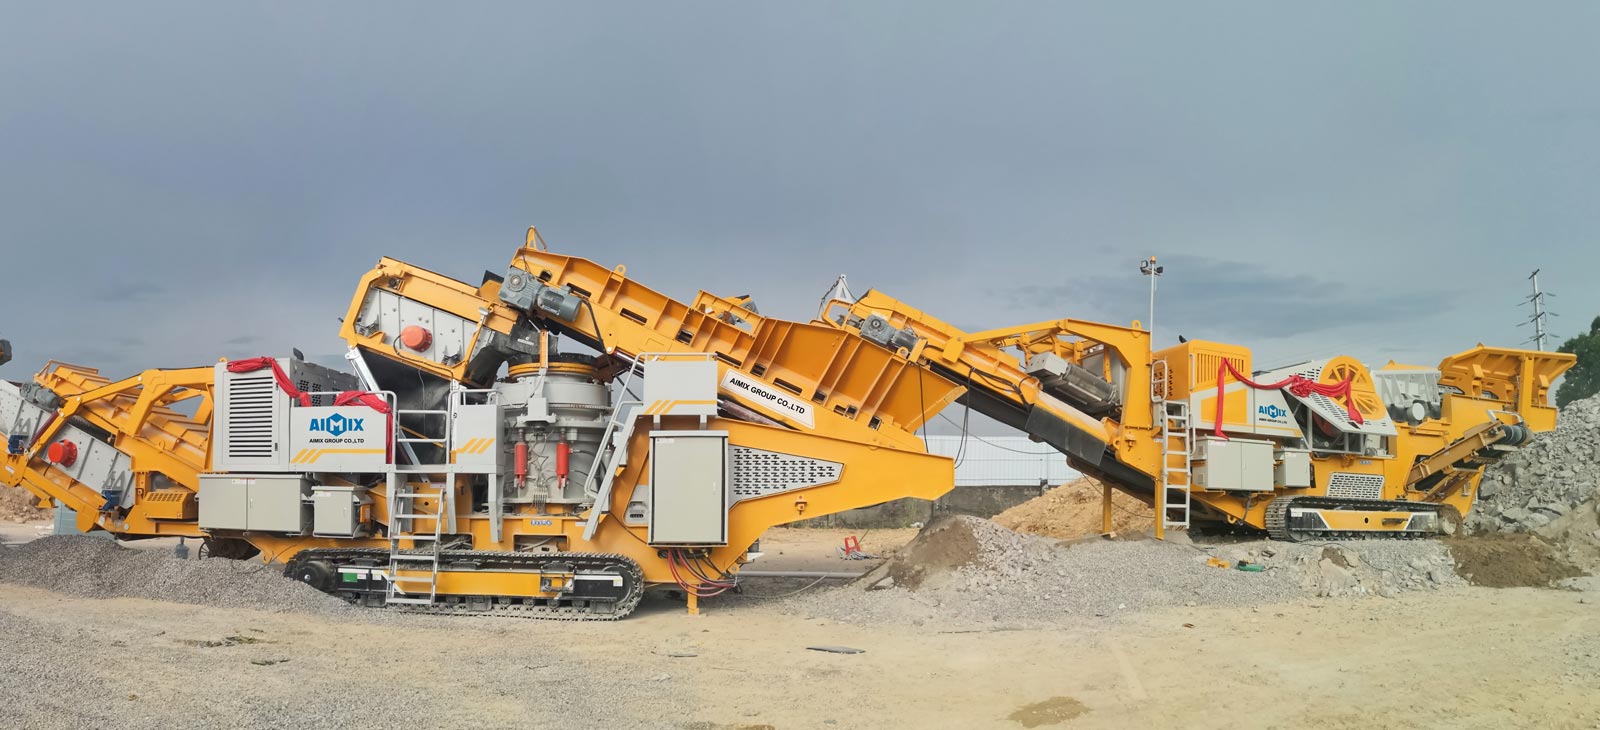 Aimix mobile crusher machine for sale